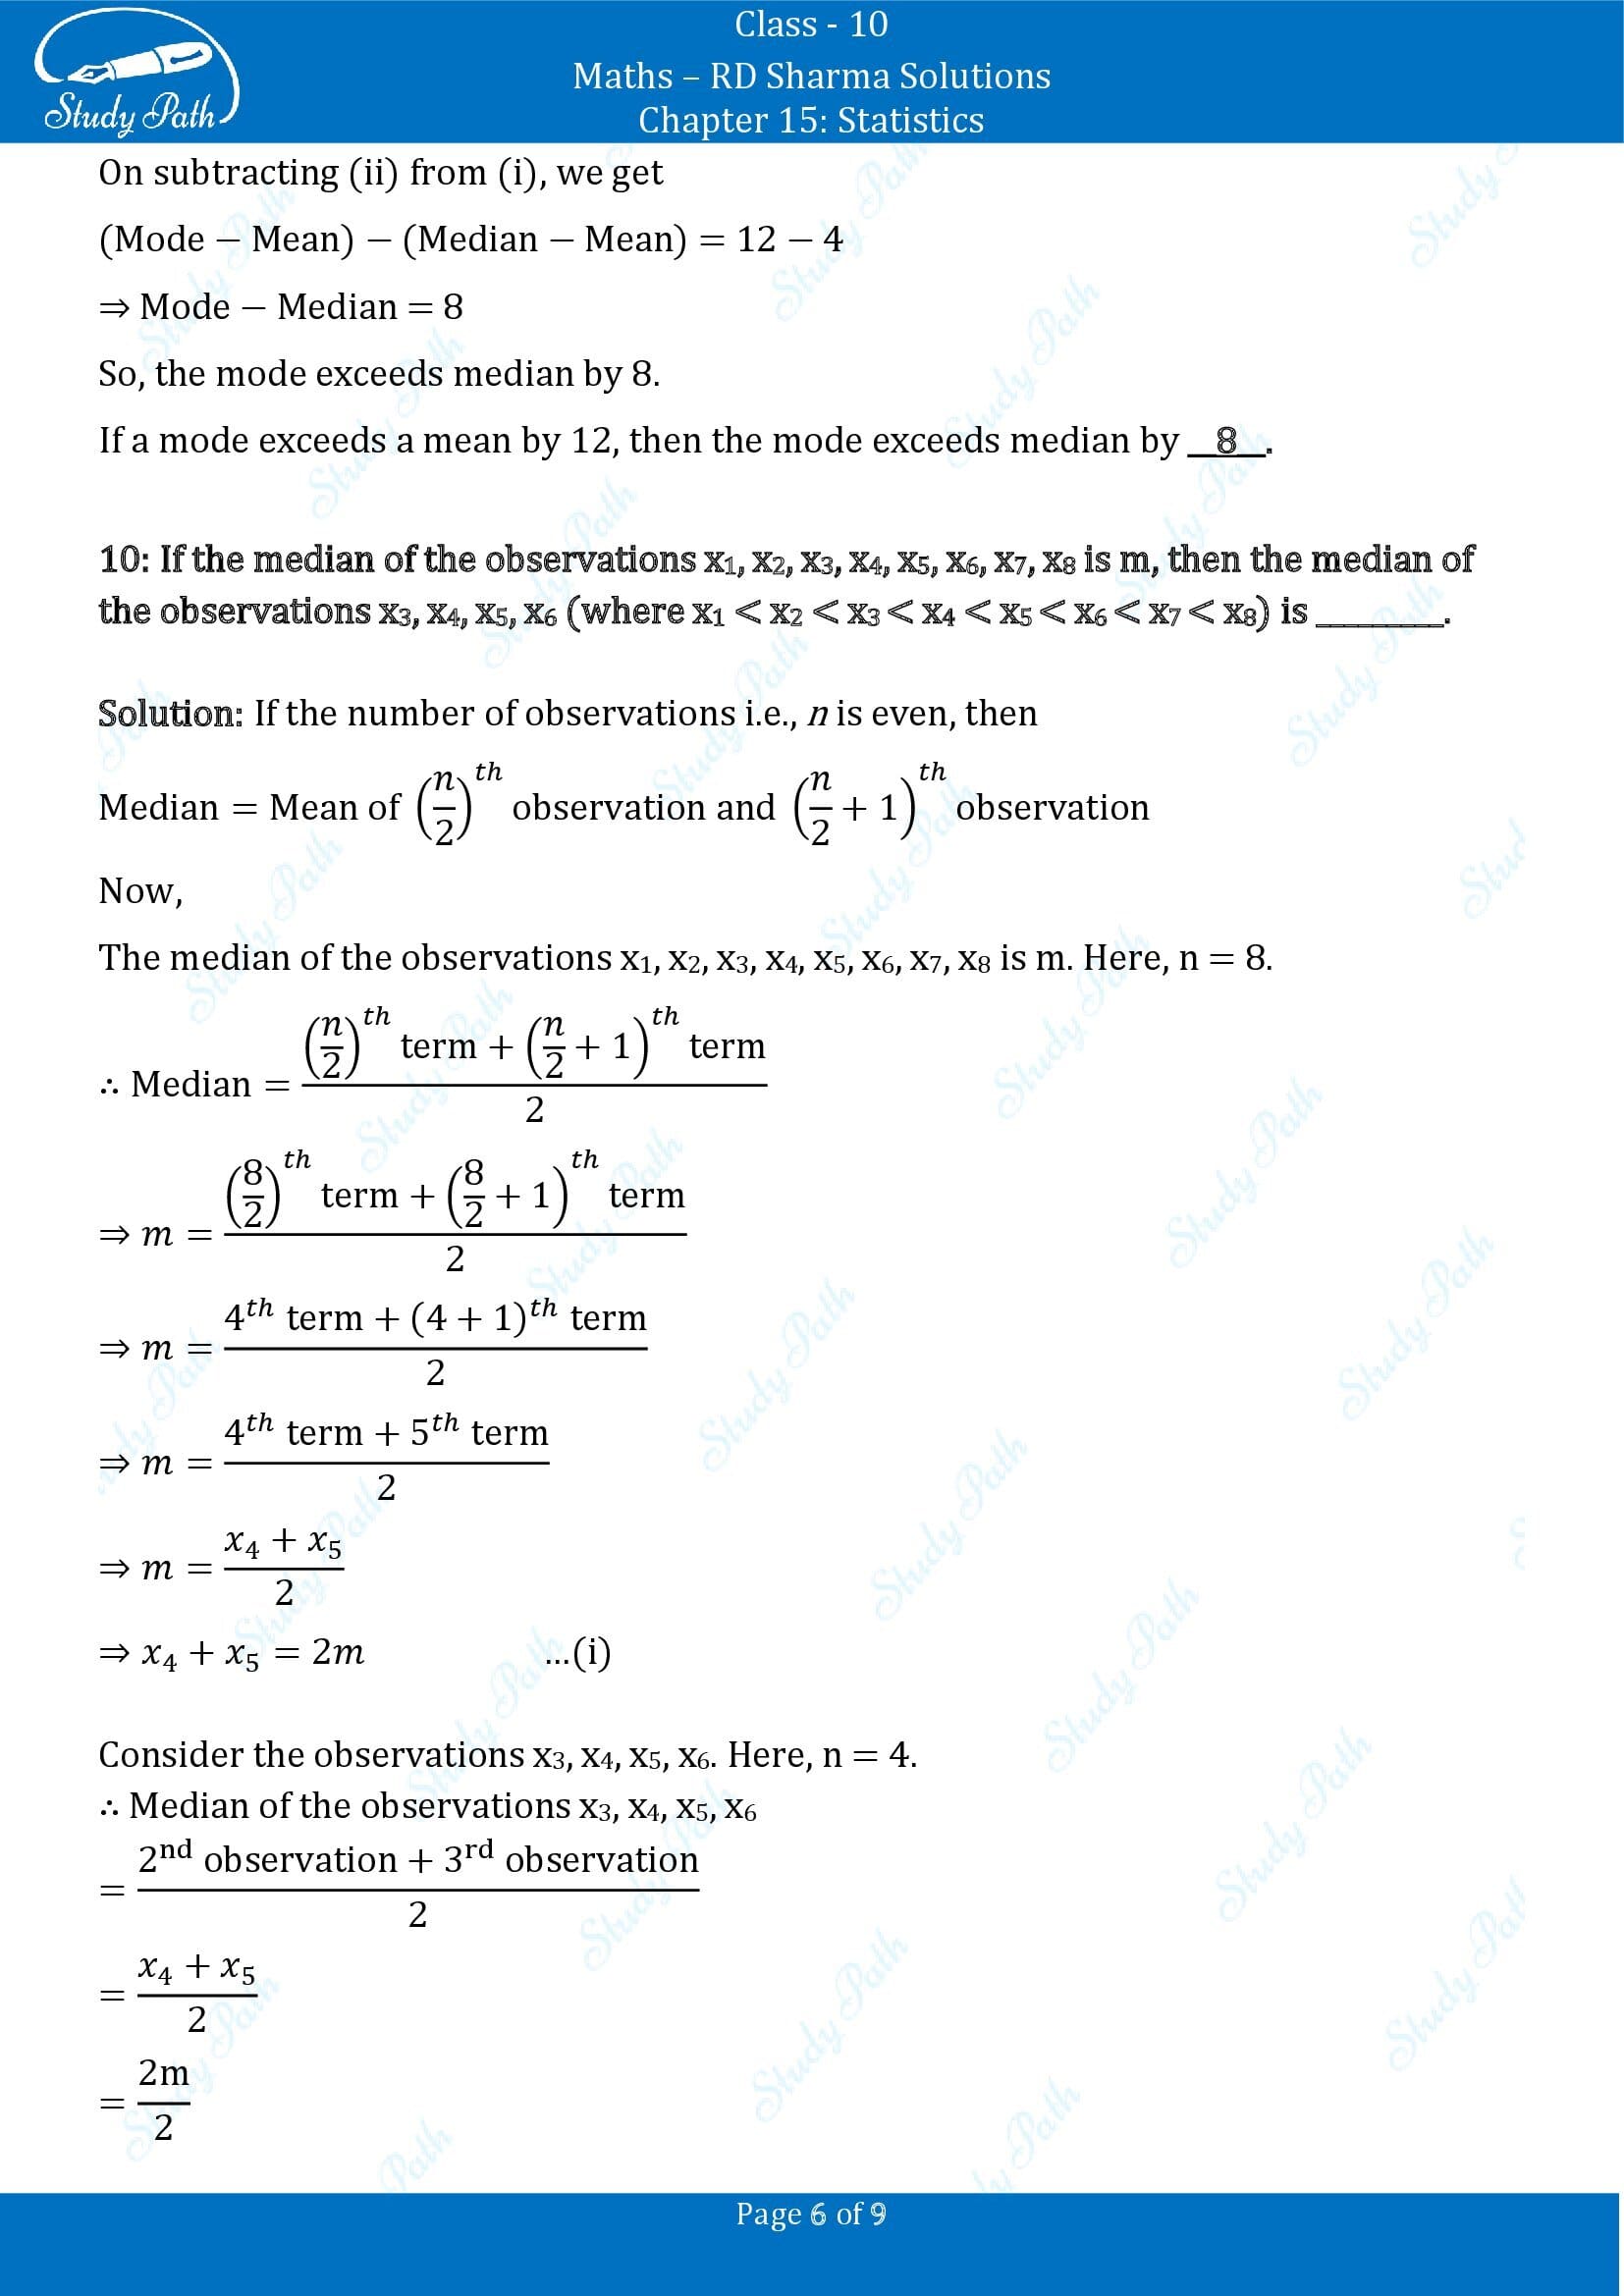 RD Sharma Solutions Class 10 Chapter 15 Statistics Fill in the Blank Type Questions FBQs 00006